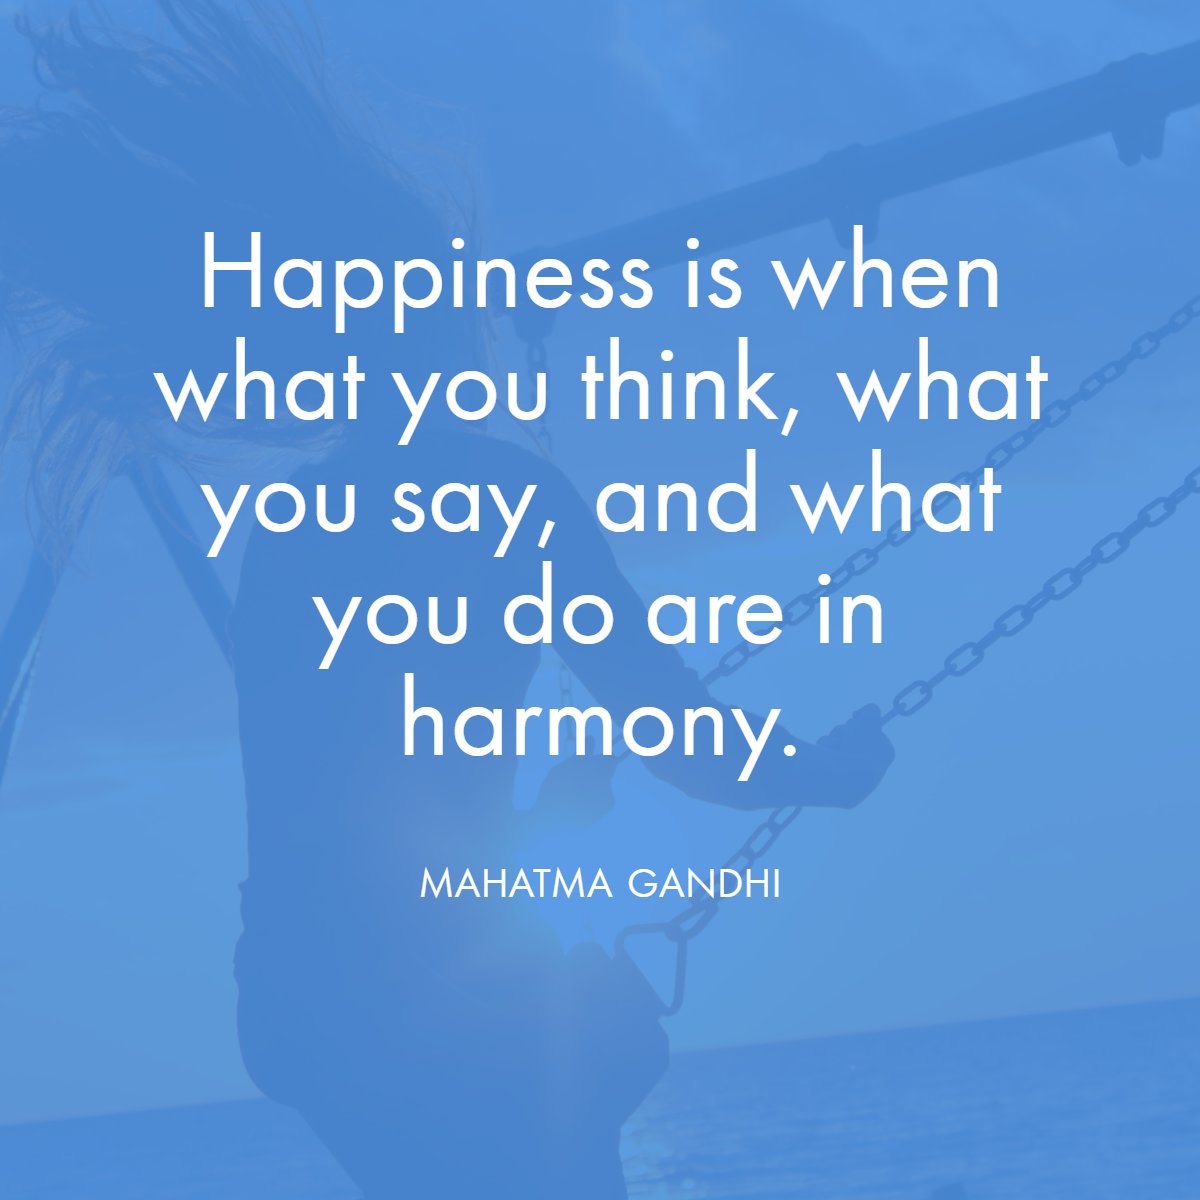 'Happiness is when what you think, what you say, and what you do are in harmony.' 
— Mahatma Gandhi 🤗

#happinesss #choosehappy #instaquote #wisdom #harmony #quoteoftheday #mahatmagandhi